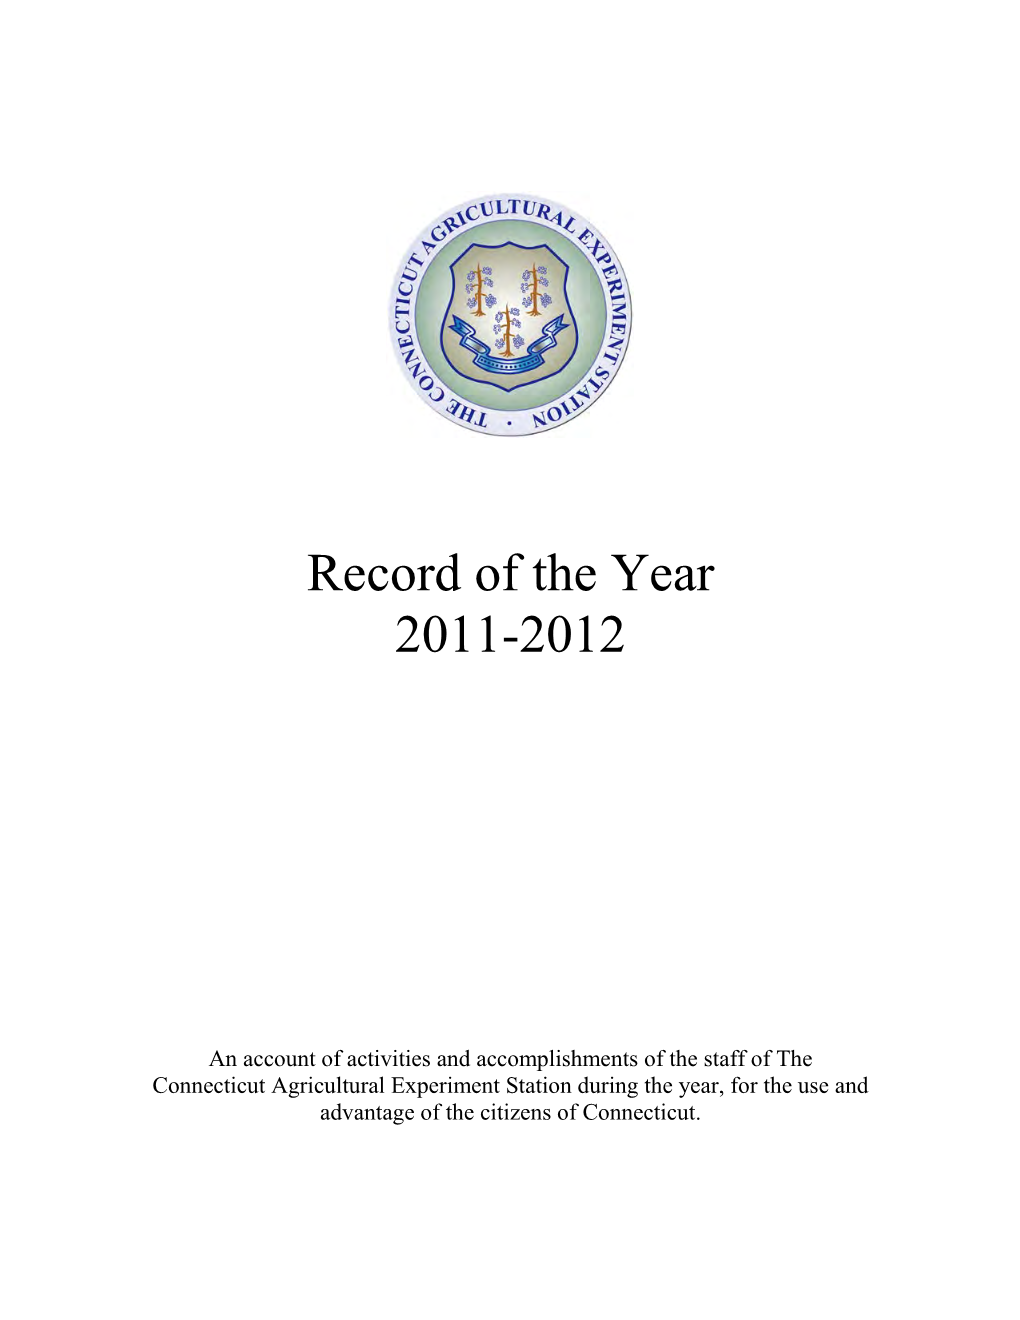 CAES, Record of the Year 2011-2012